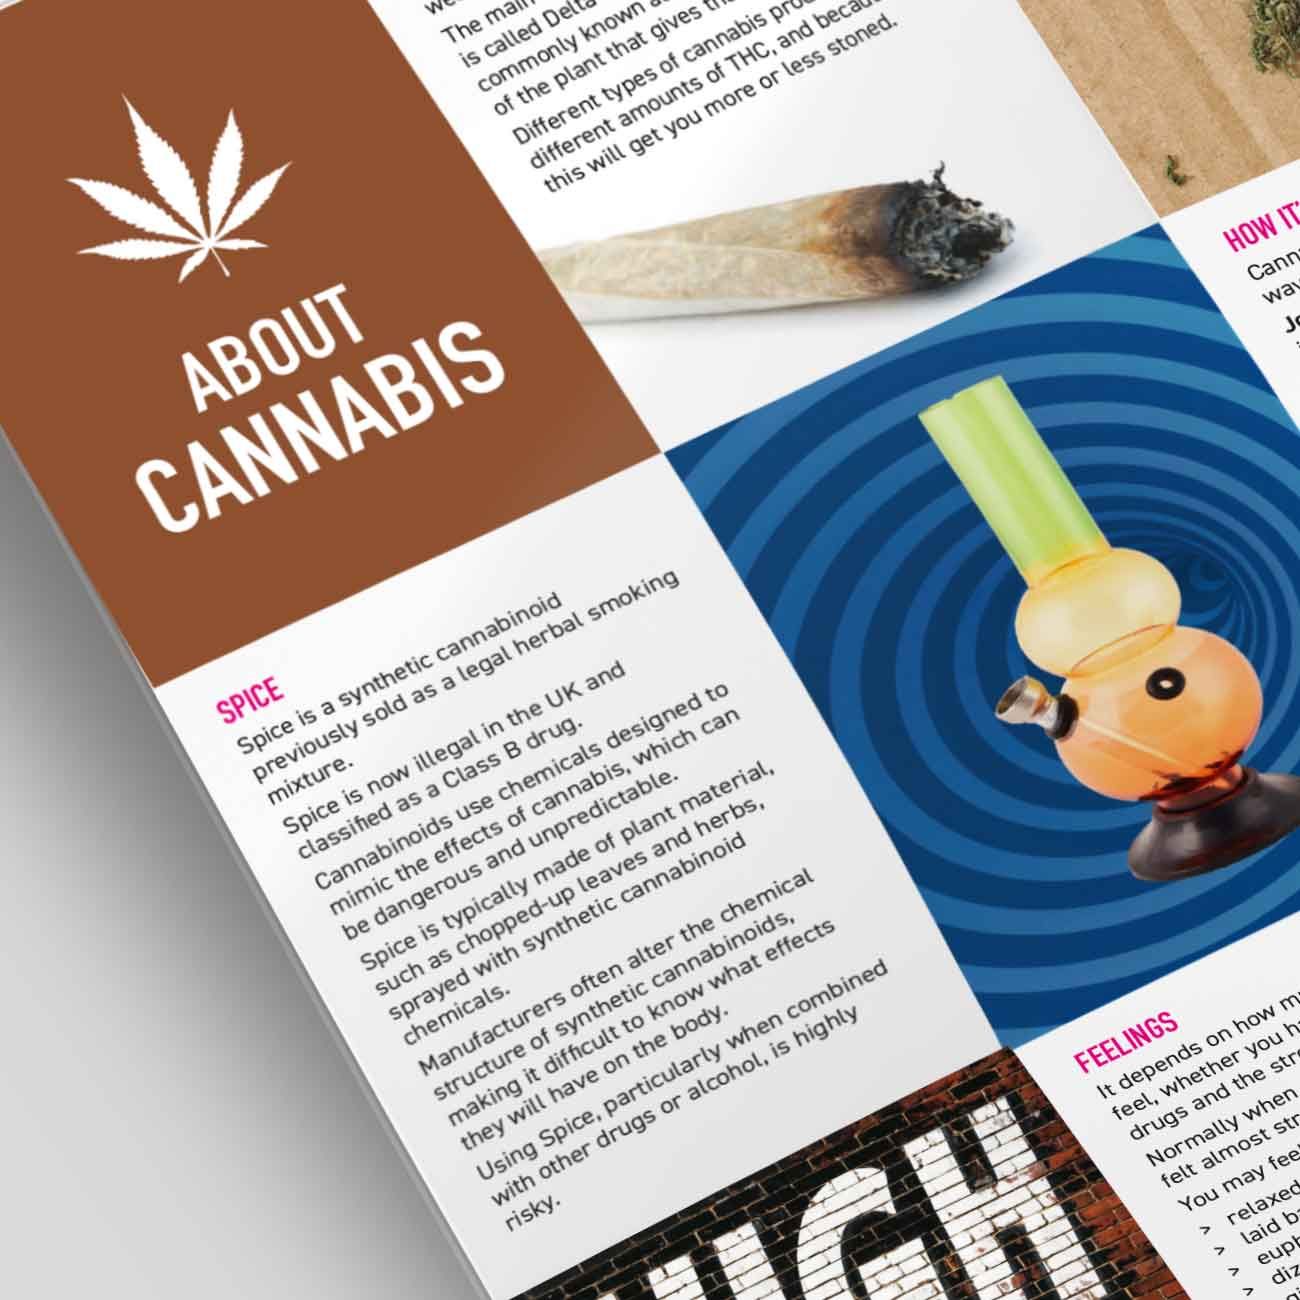 about cannabis design, picture of a cannabis bong and a partially smoked joint